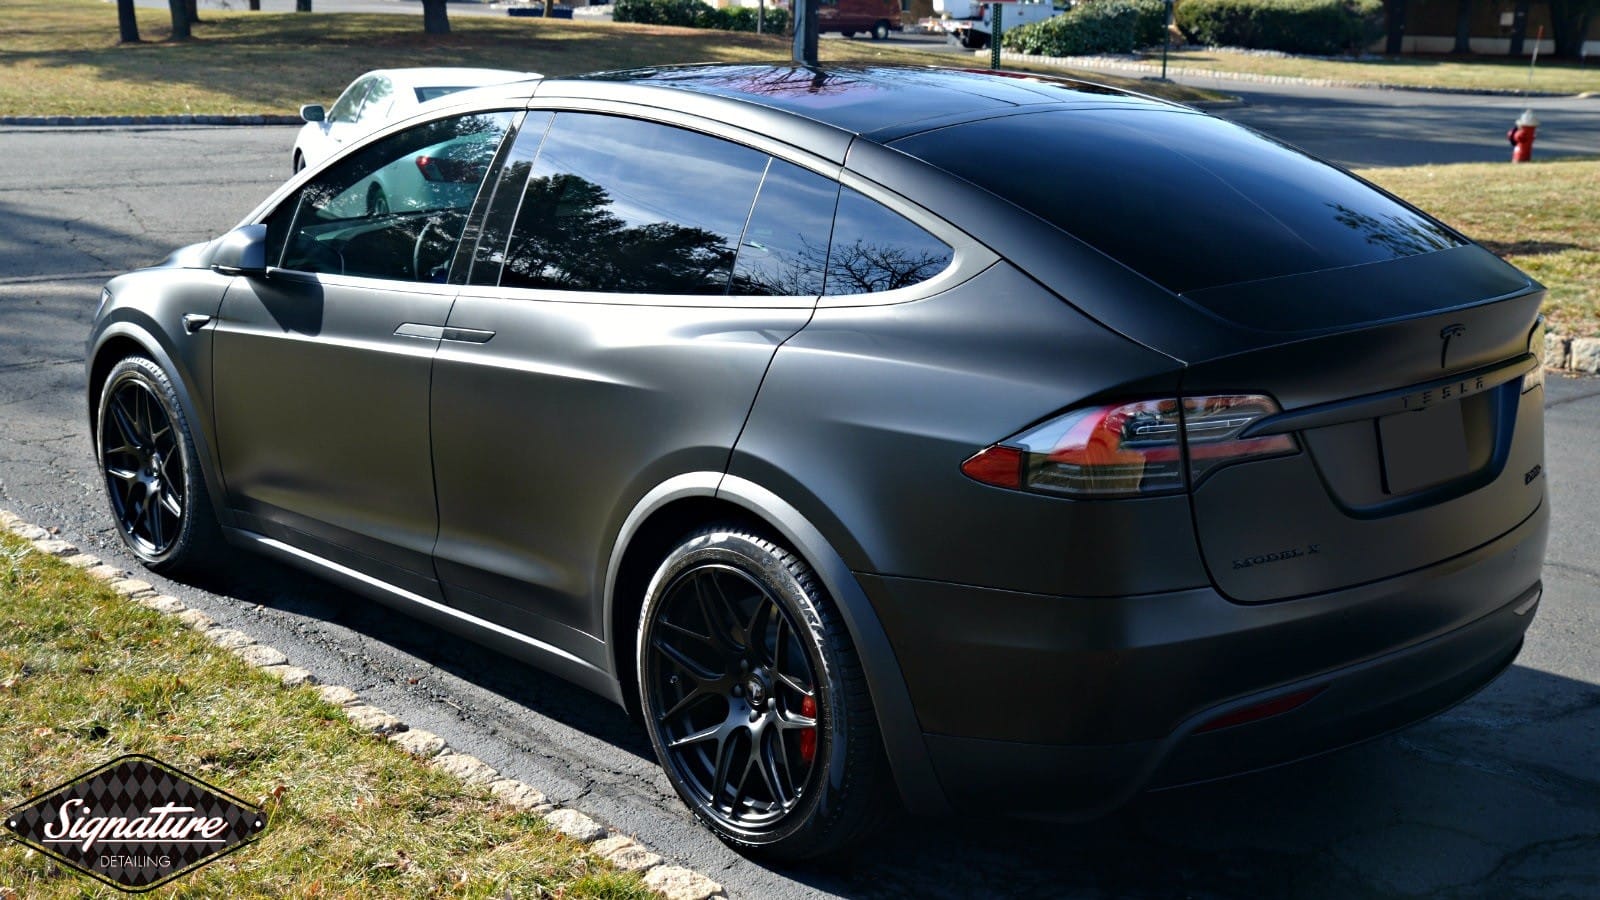 The matte finish on this Tesla Model X also protects the surface with Matte Clear Bra installed by Signature Detailing NYC.